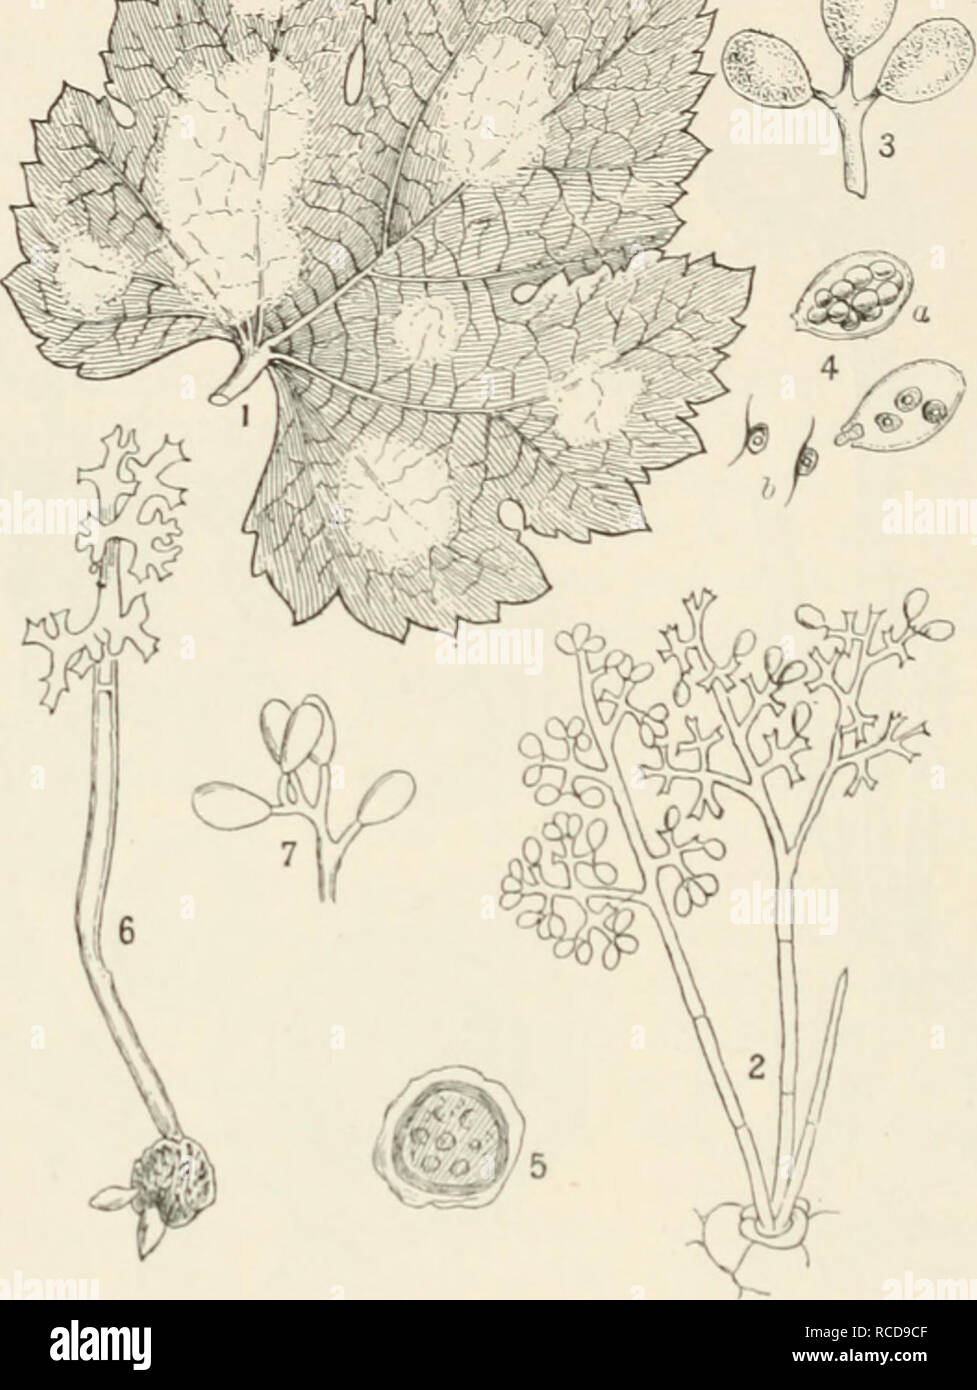 . Diseases of cultivated plants and trees. Plant diseases; Plants -- Wounds and injuries; Plants, Protection of; Trees -- Diseases and pests. I20 DISEASES OF CULTIVATED PLANTS liberated and dispersed throughout the house. Tendrils and parts of the flower behave in a similar manner when attacked. A^ffiiwJl?^ ---^T-^. Fig. 26.—Plasmopara viticola. i, under surface of a vine leaf showing white patches of mildew ; 2, group of conidiospores bearing numerous conidia ; 3, three conidia more highly mag.; 4, conidia containing zoospores, in b, two zoospores have escaped from the conidium ; 5, mature oo Stock Photo